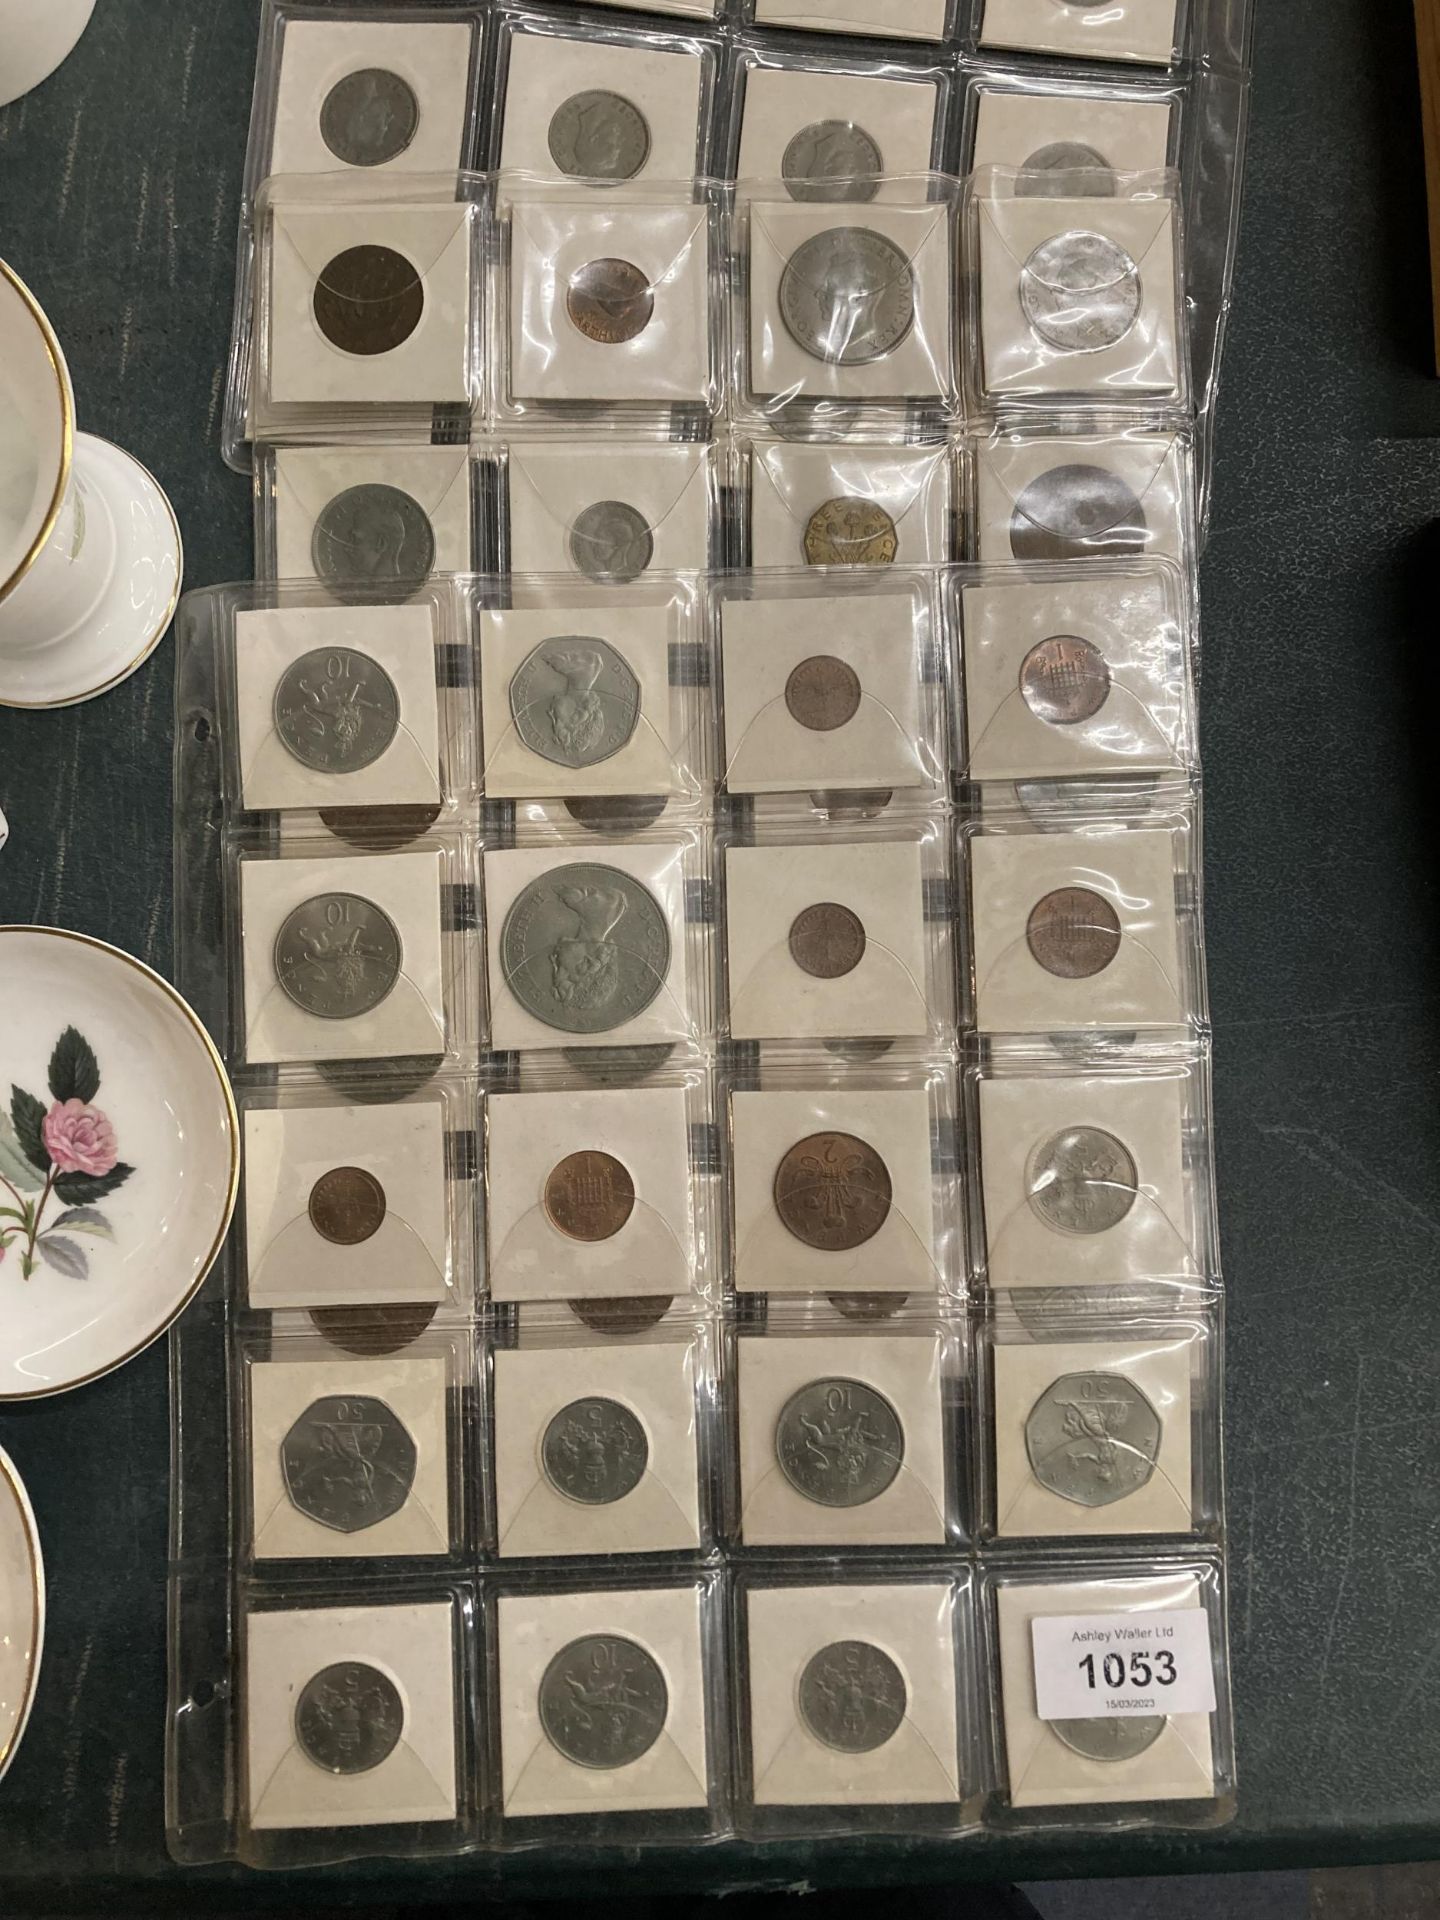 A LARGE QUANTITY OF DECIMAL AND PLRE-DECIMAL COINS TO INCLUDE A WINSTON CHURCHILL CROWN, ETC - Image 3 of 5